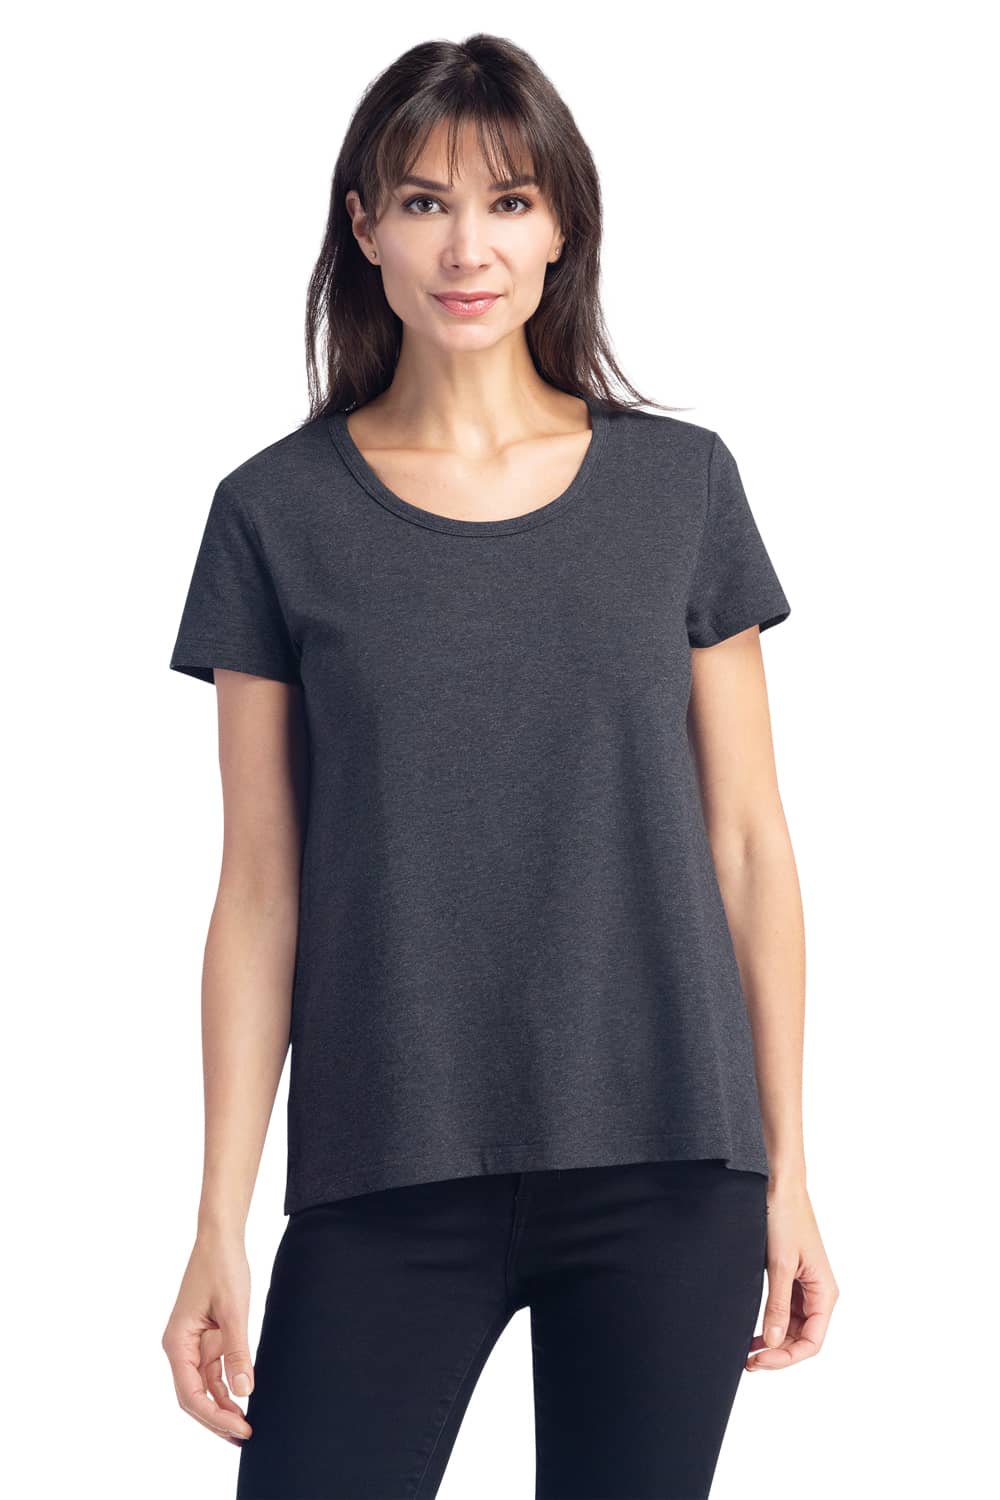 Women's Relaxed EcoFabric™ Scoop Neck Tee Womens>Casual>Top Fishers Finery Heather Gray X-Small 